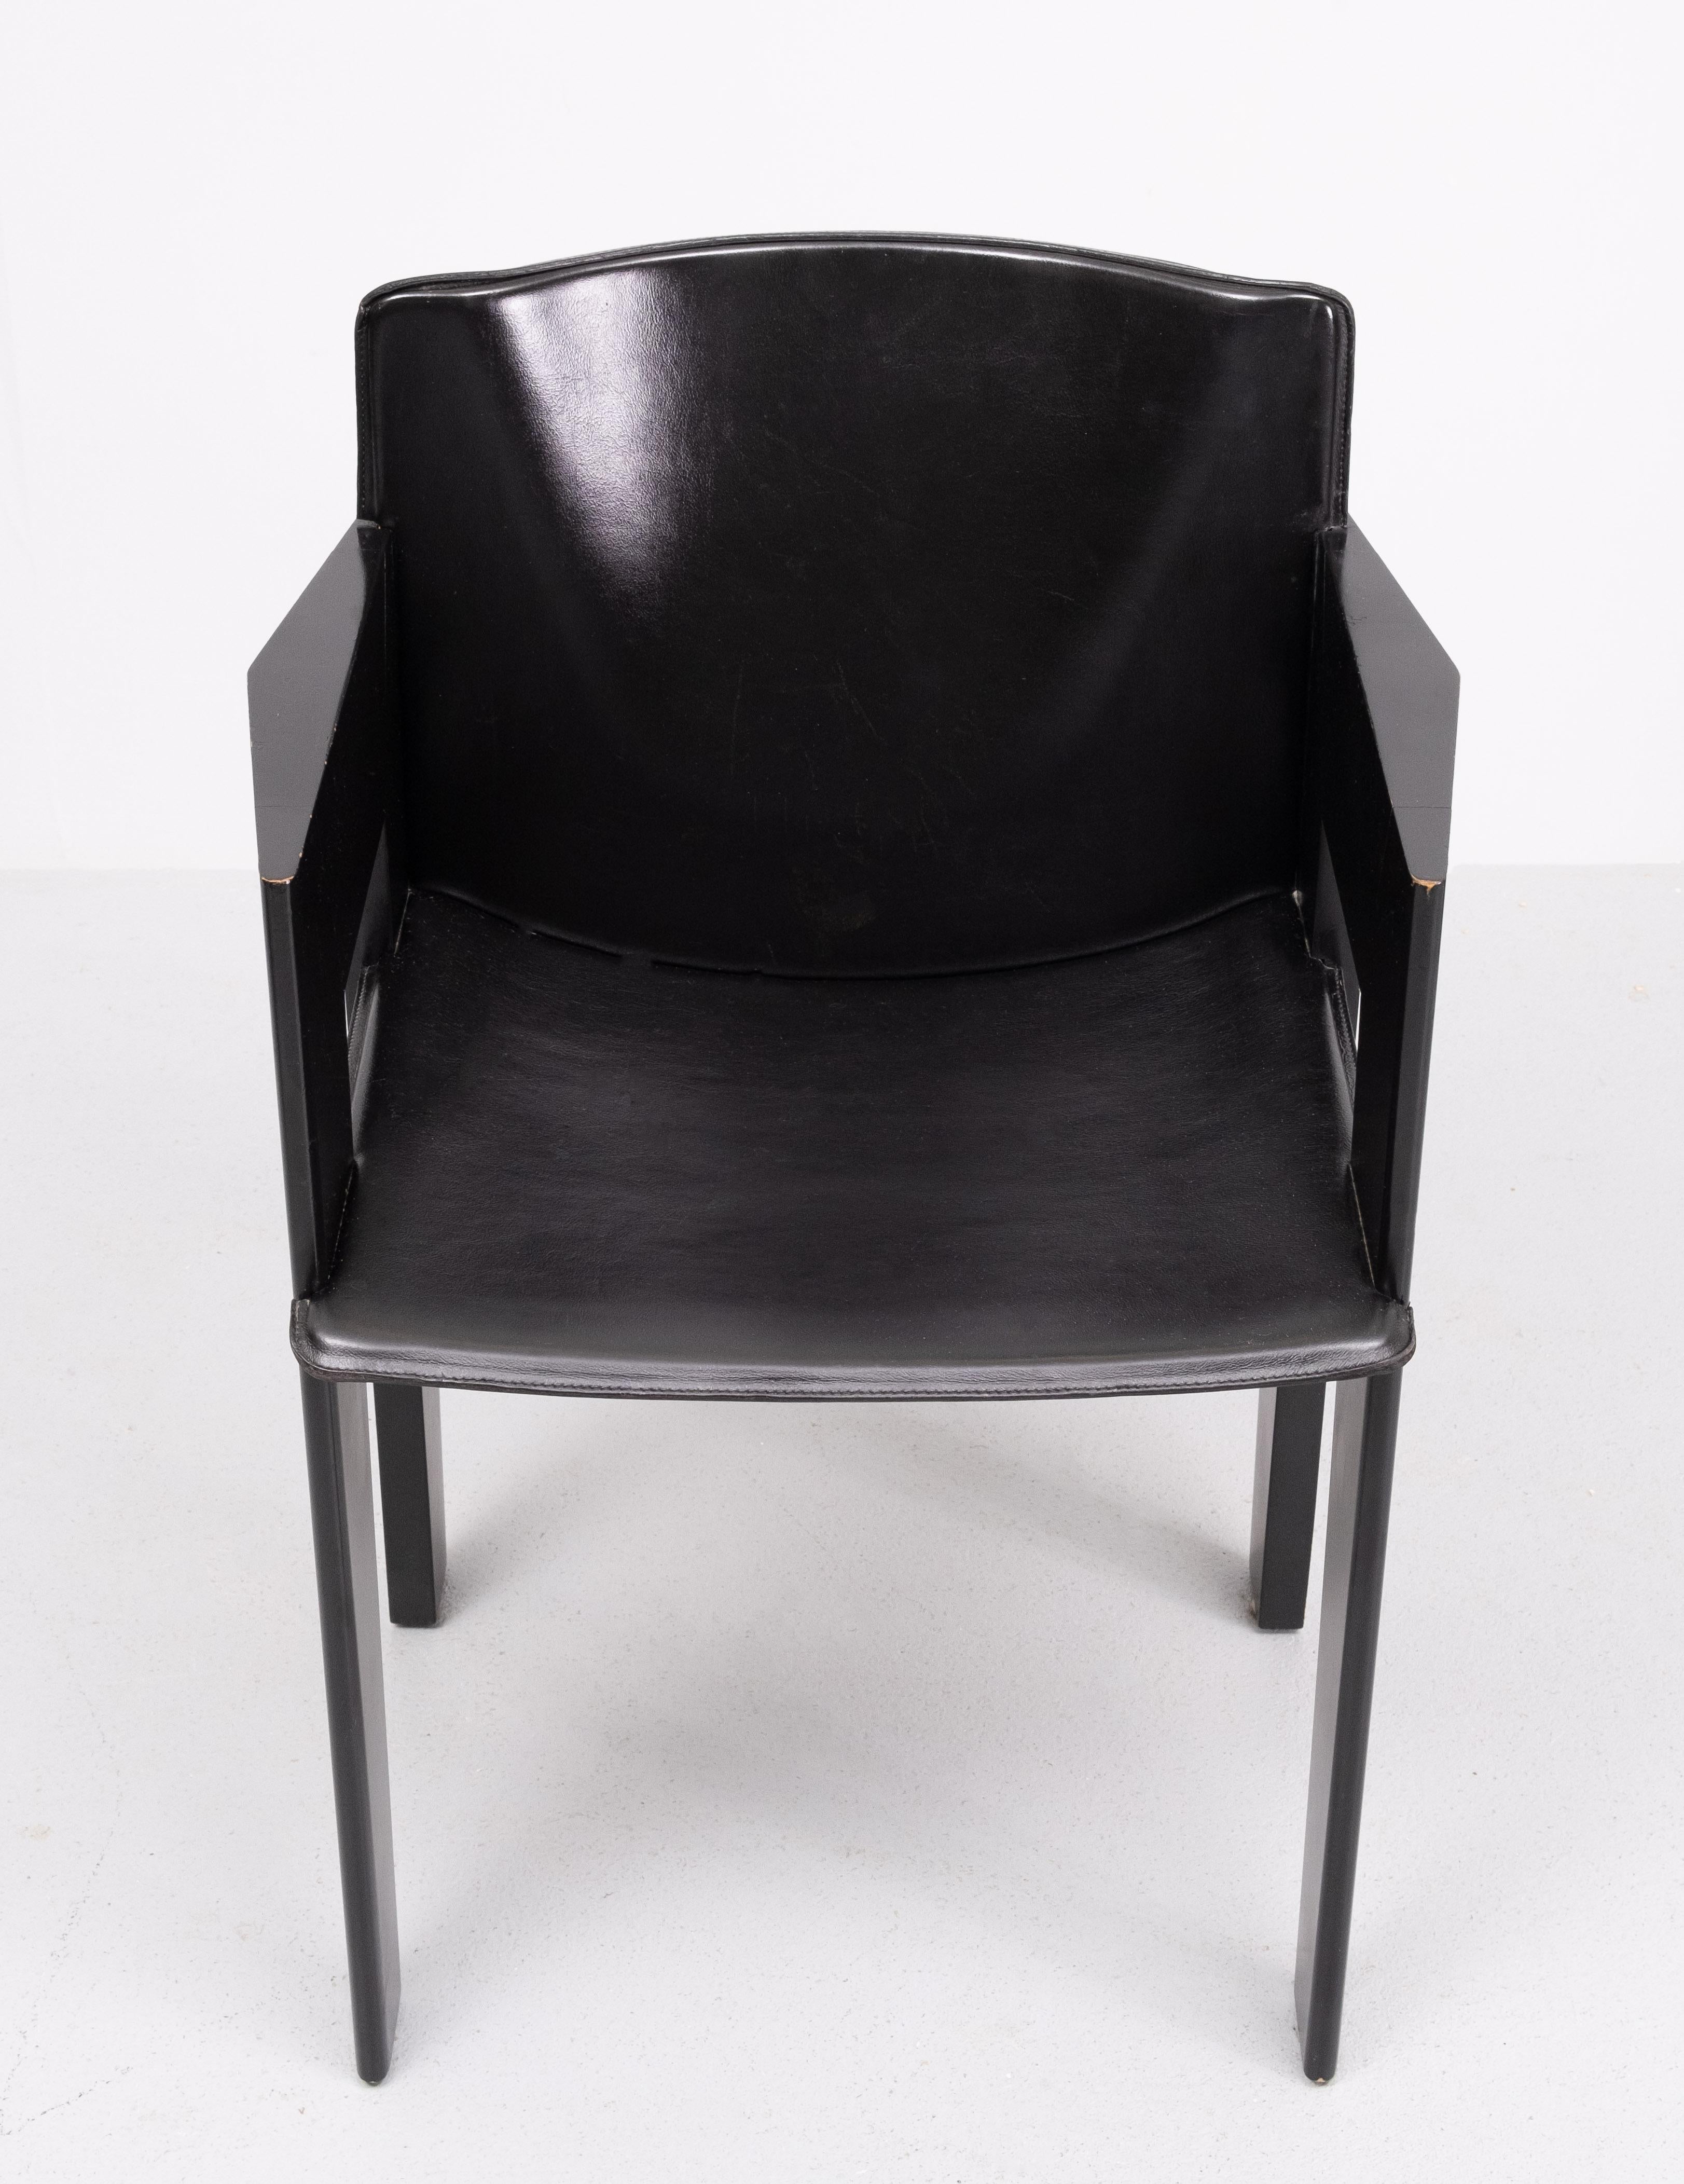 6 Leather & Wood Dining Chairs by Arnold Merckx for Arco, c.1980 For Sale 4